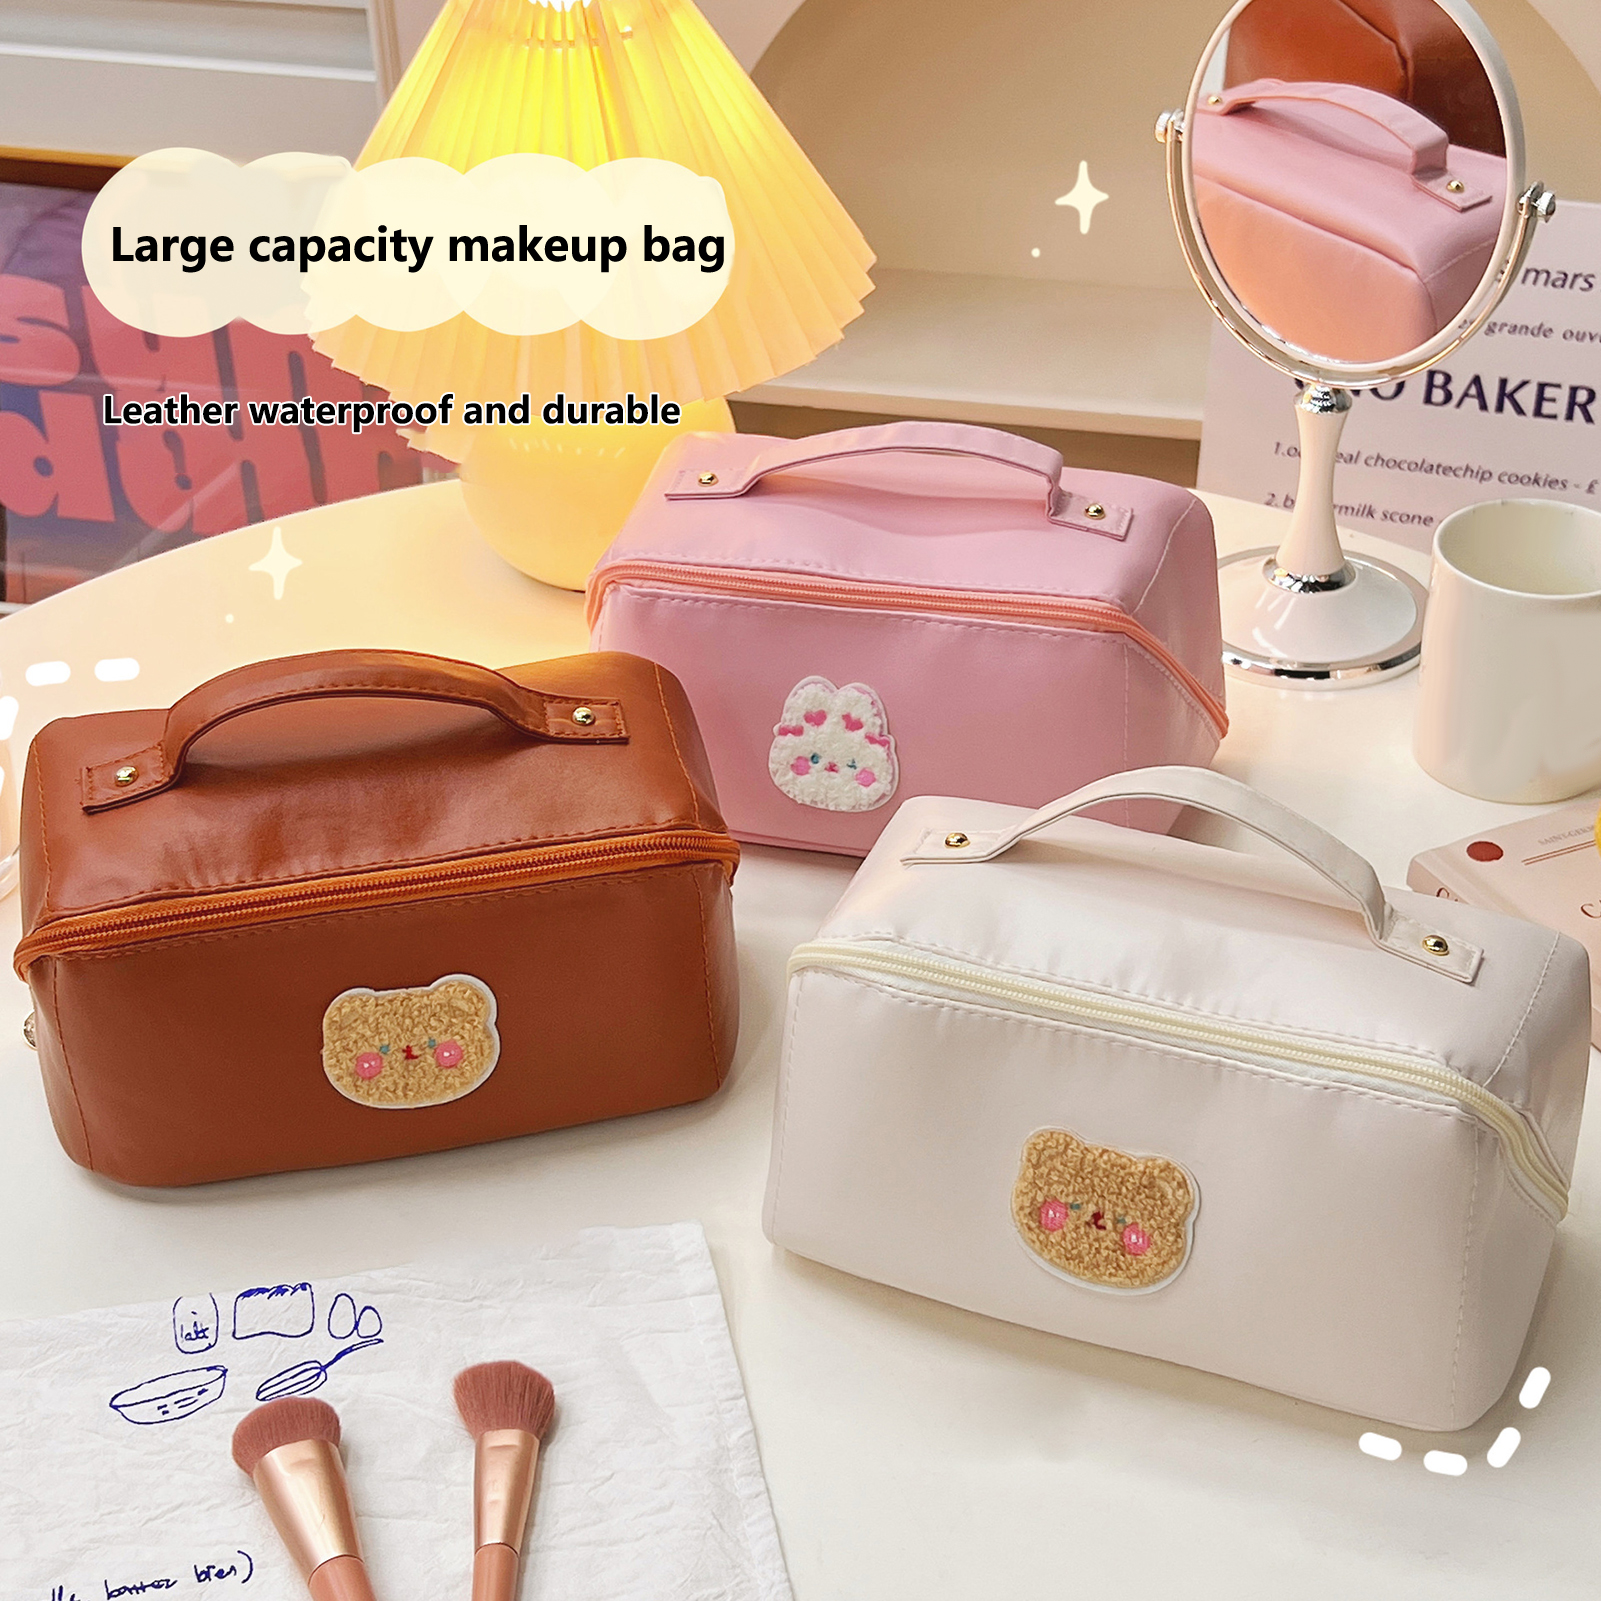  YUNZSXJY Large Capacity Cosmetic Bag Travel Makeup Bag for  Women with Portable Handle, Opens Flat Multifunctional Checkered Makeup Bag  Waterproof PU Leather Toiletry Bag, Pink : Beauty & Personal Care